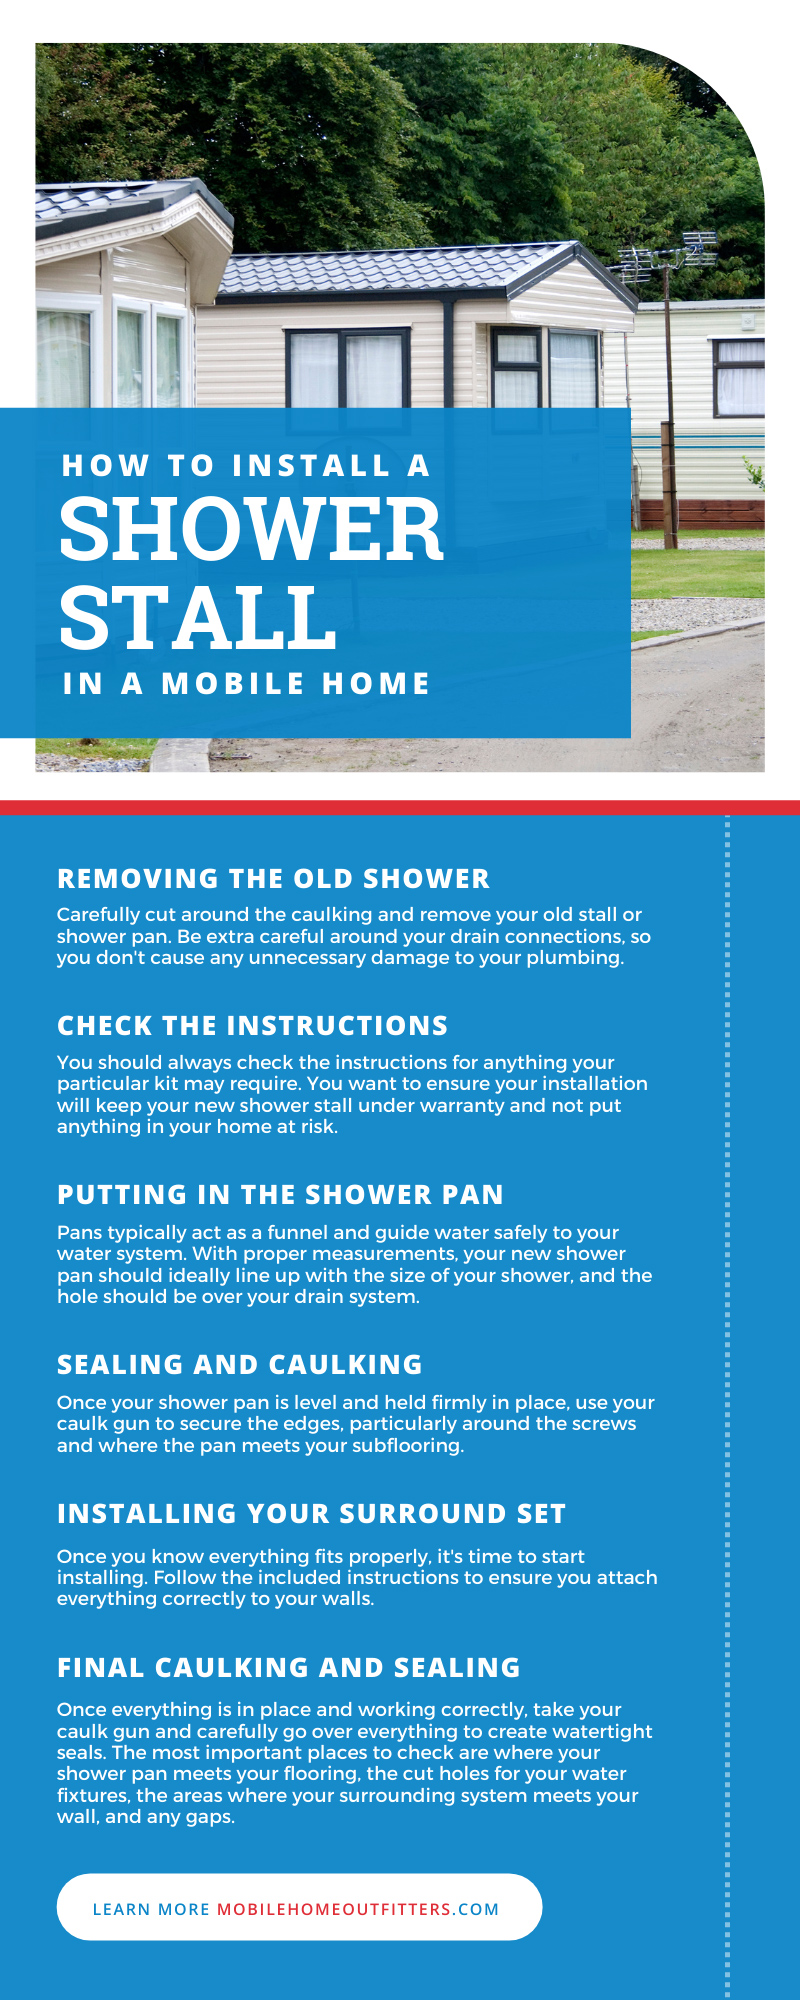 How To Install a Shower Stall in a Mobile Home